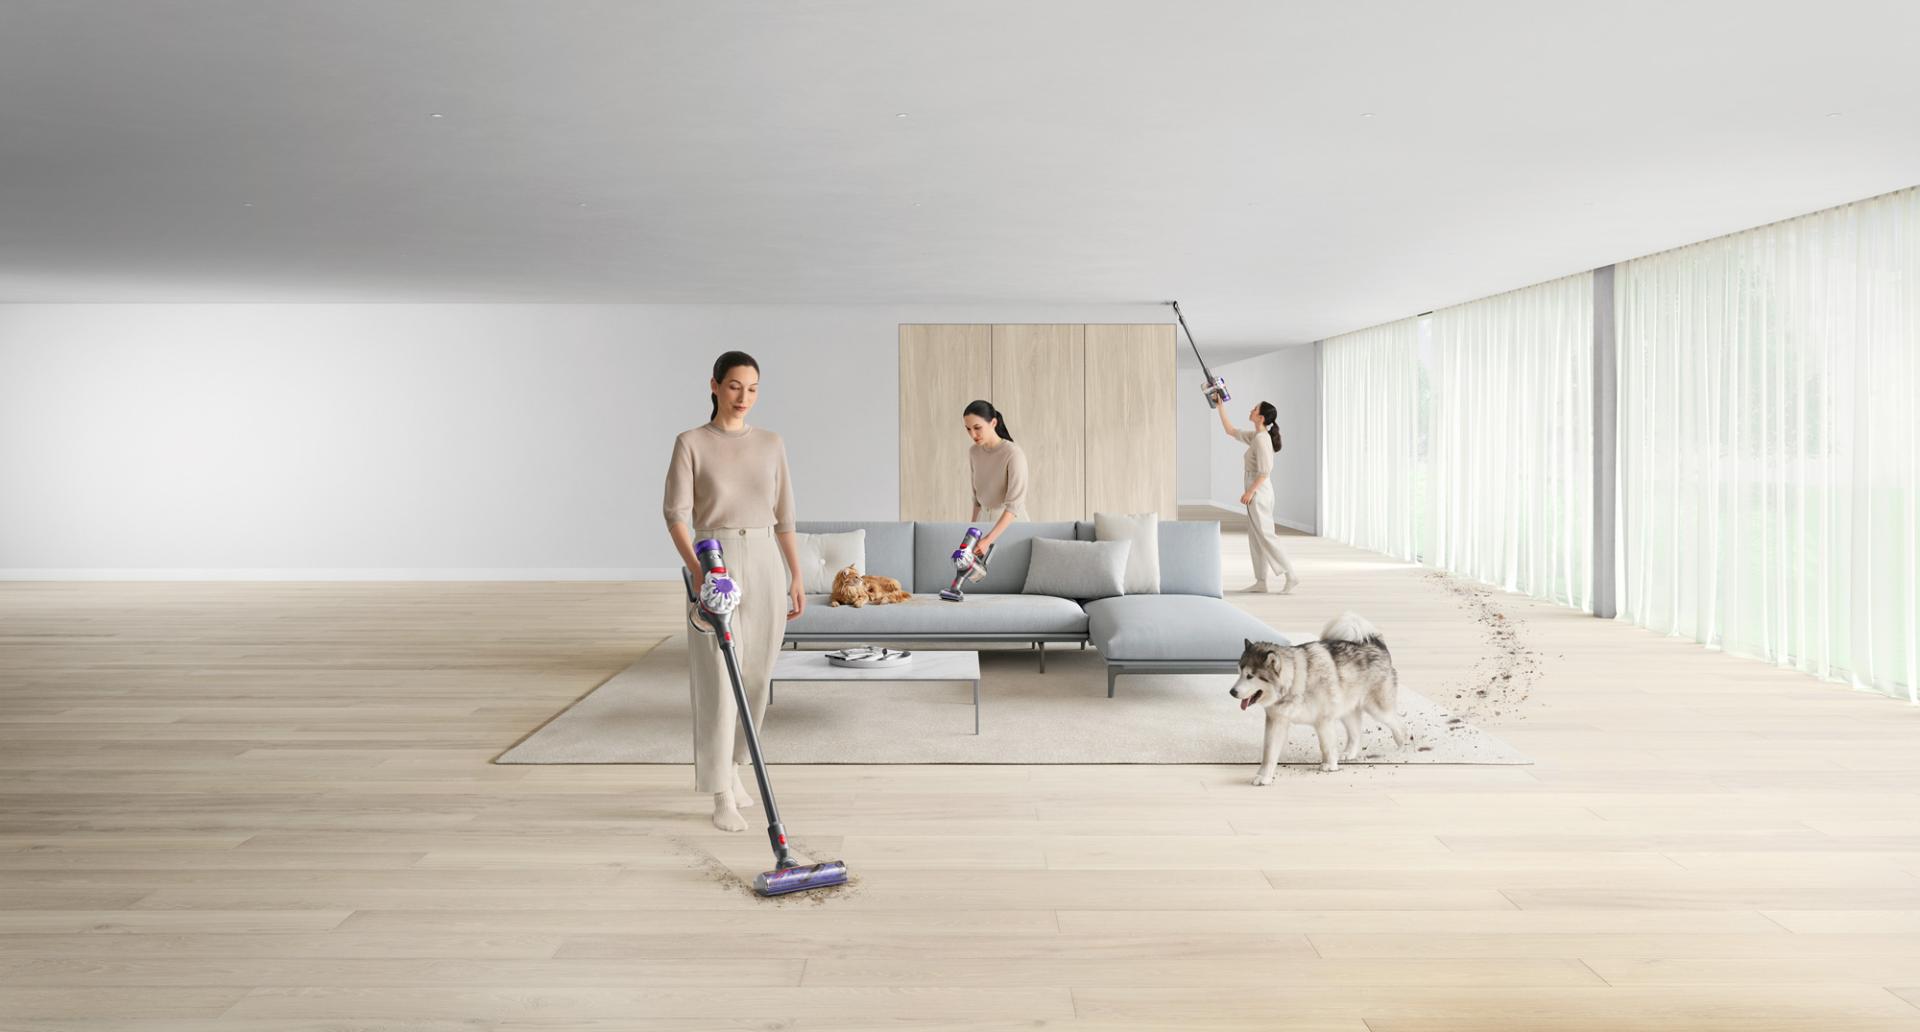 Dyson V8 vacuum cleaning hard floors and a sofa.